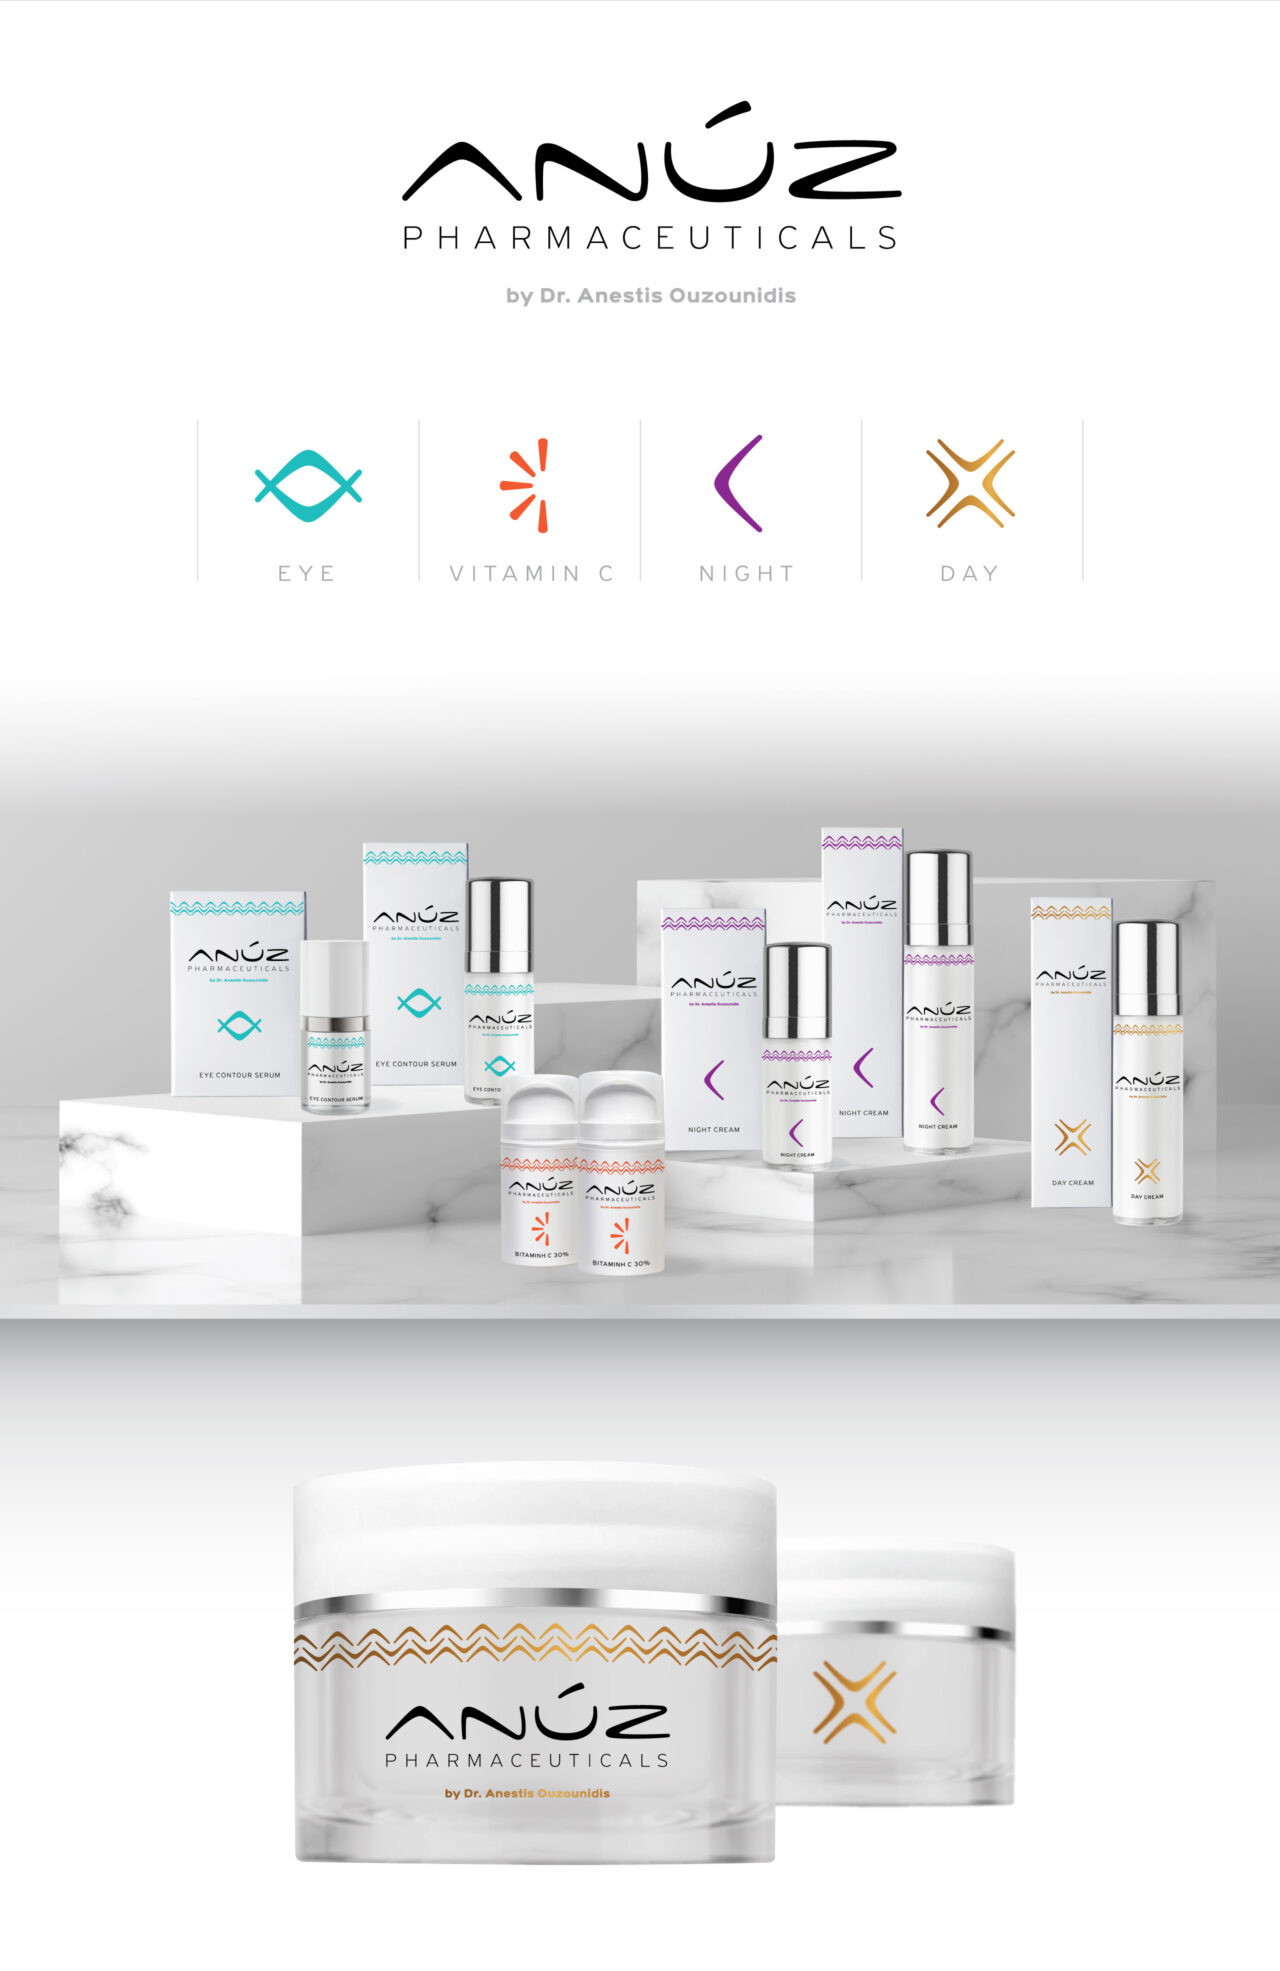 Branding system and packaging design for ANUZ pharmaceuticals